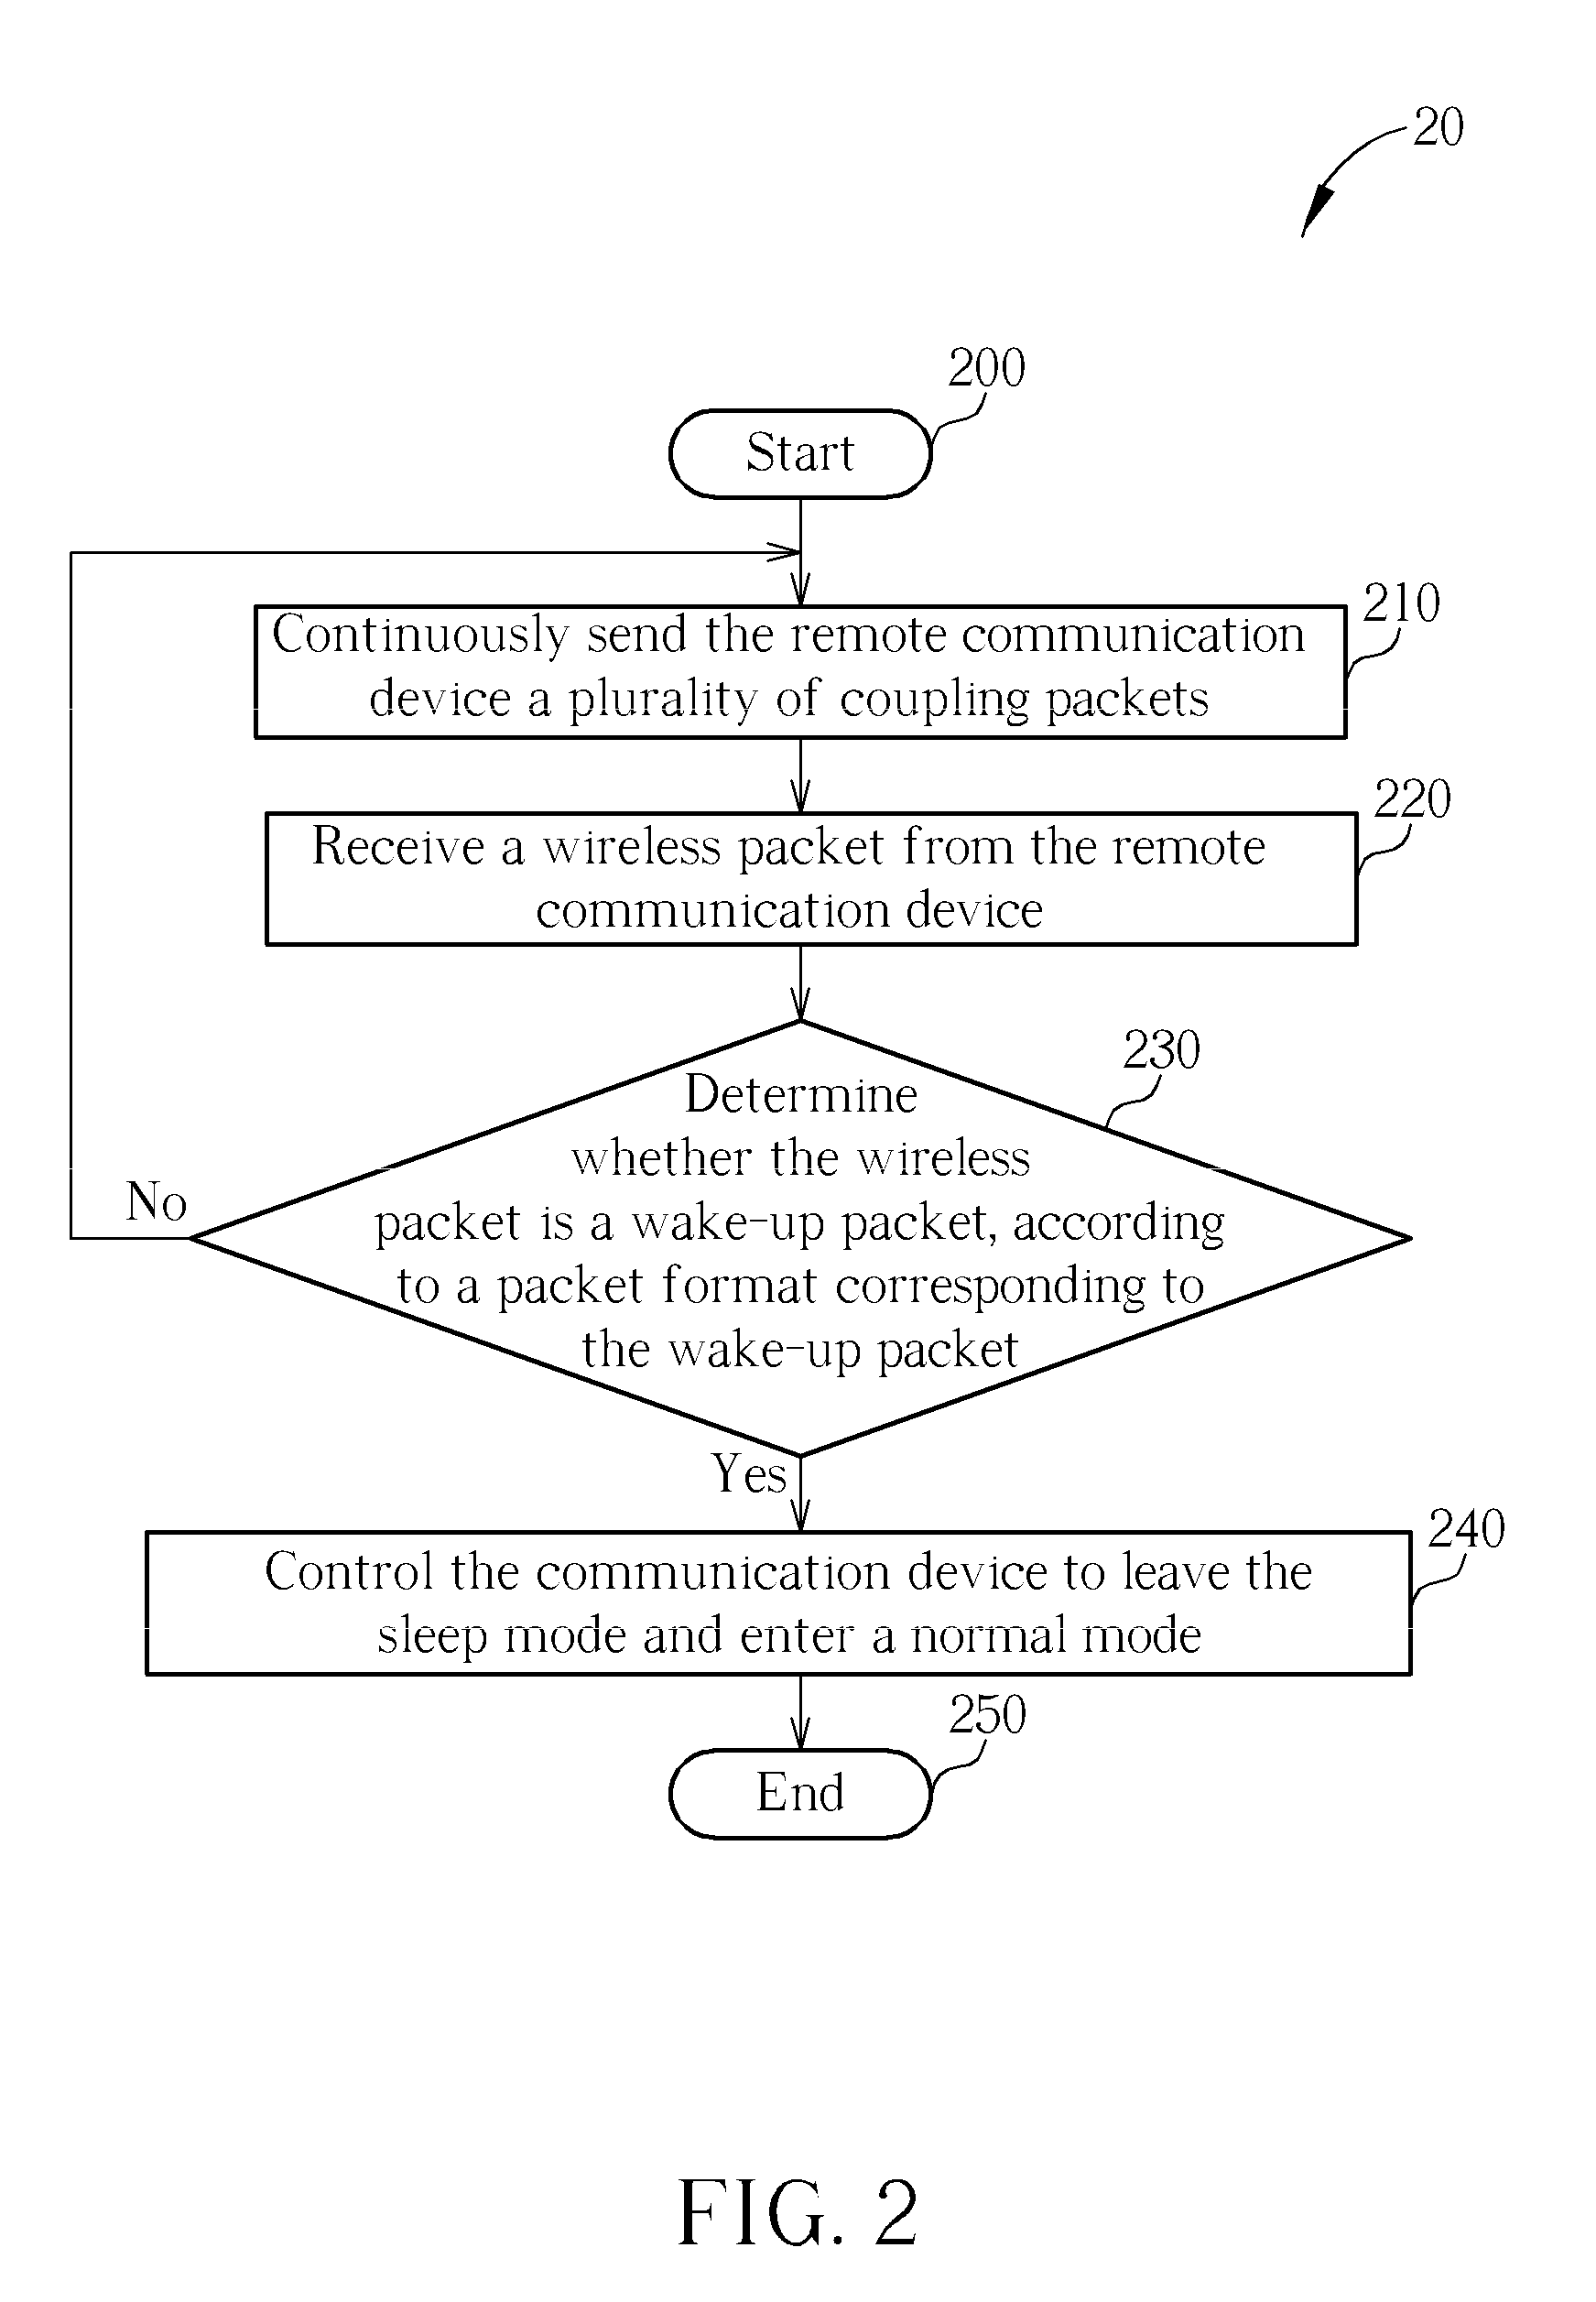 Method and Apparatus of Awaking a Communication Device